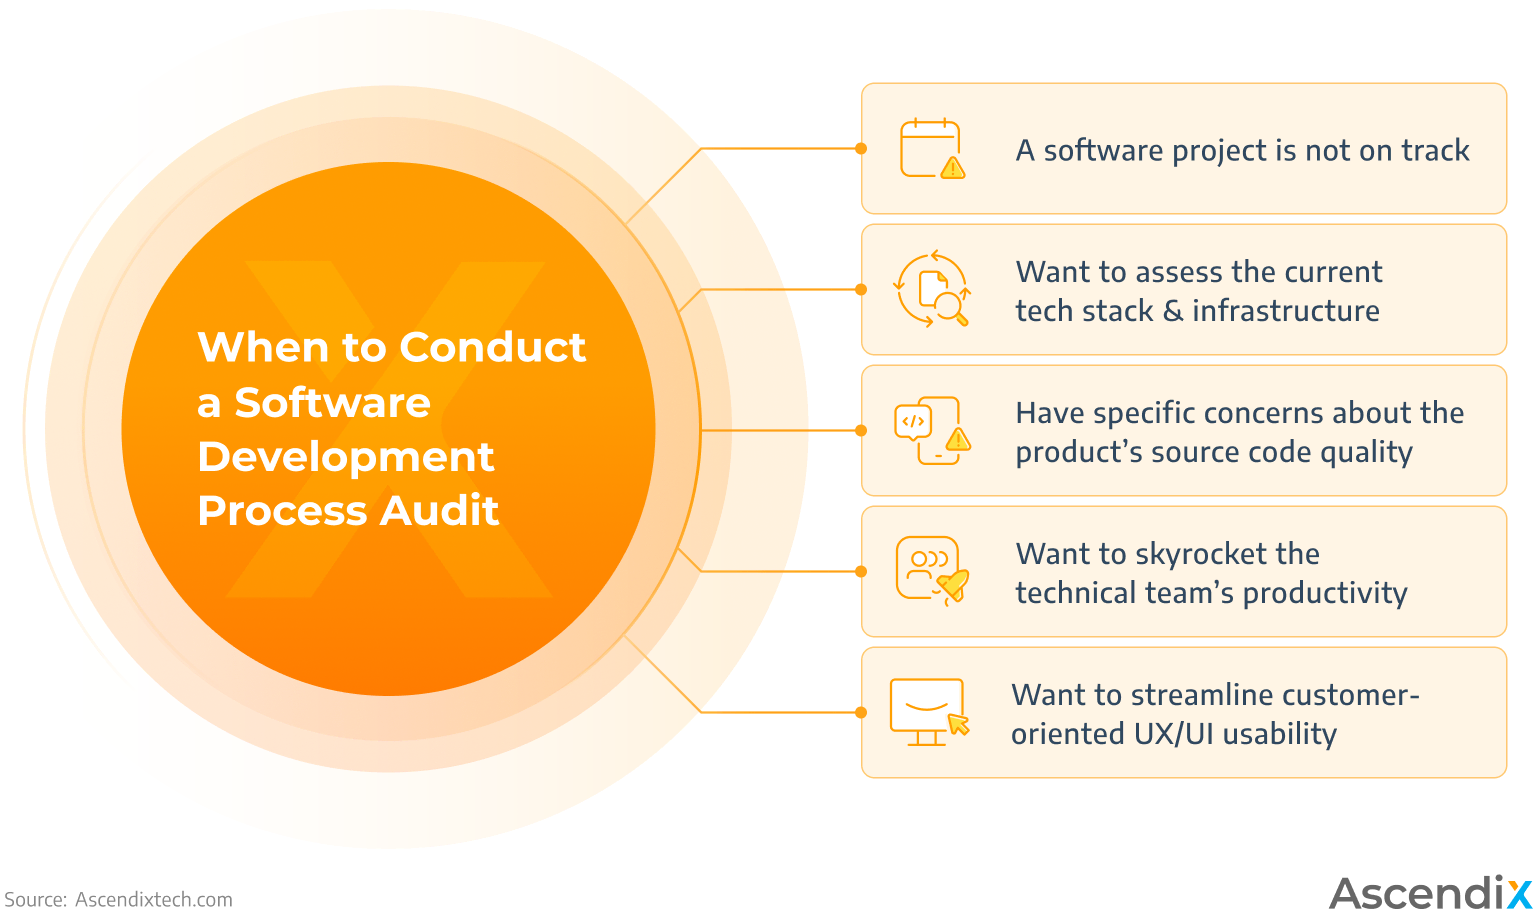 When to Conduct a Software Development Process Audit